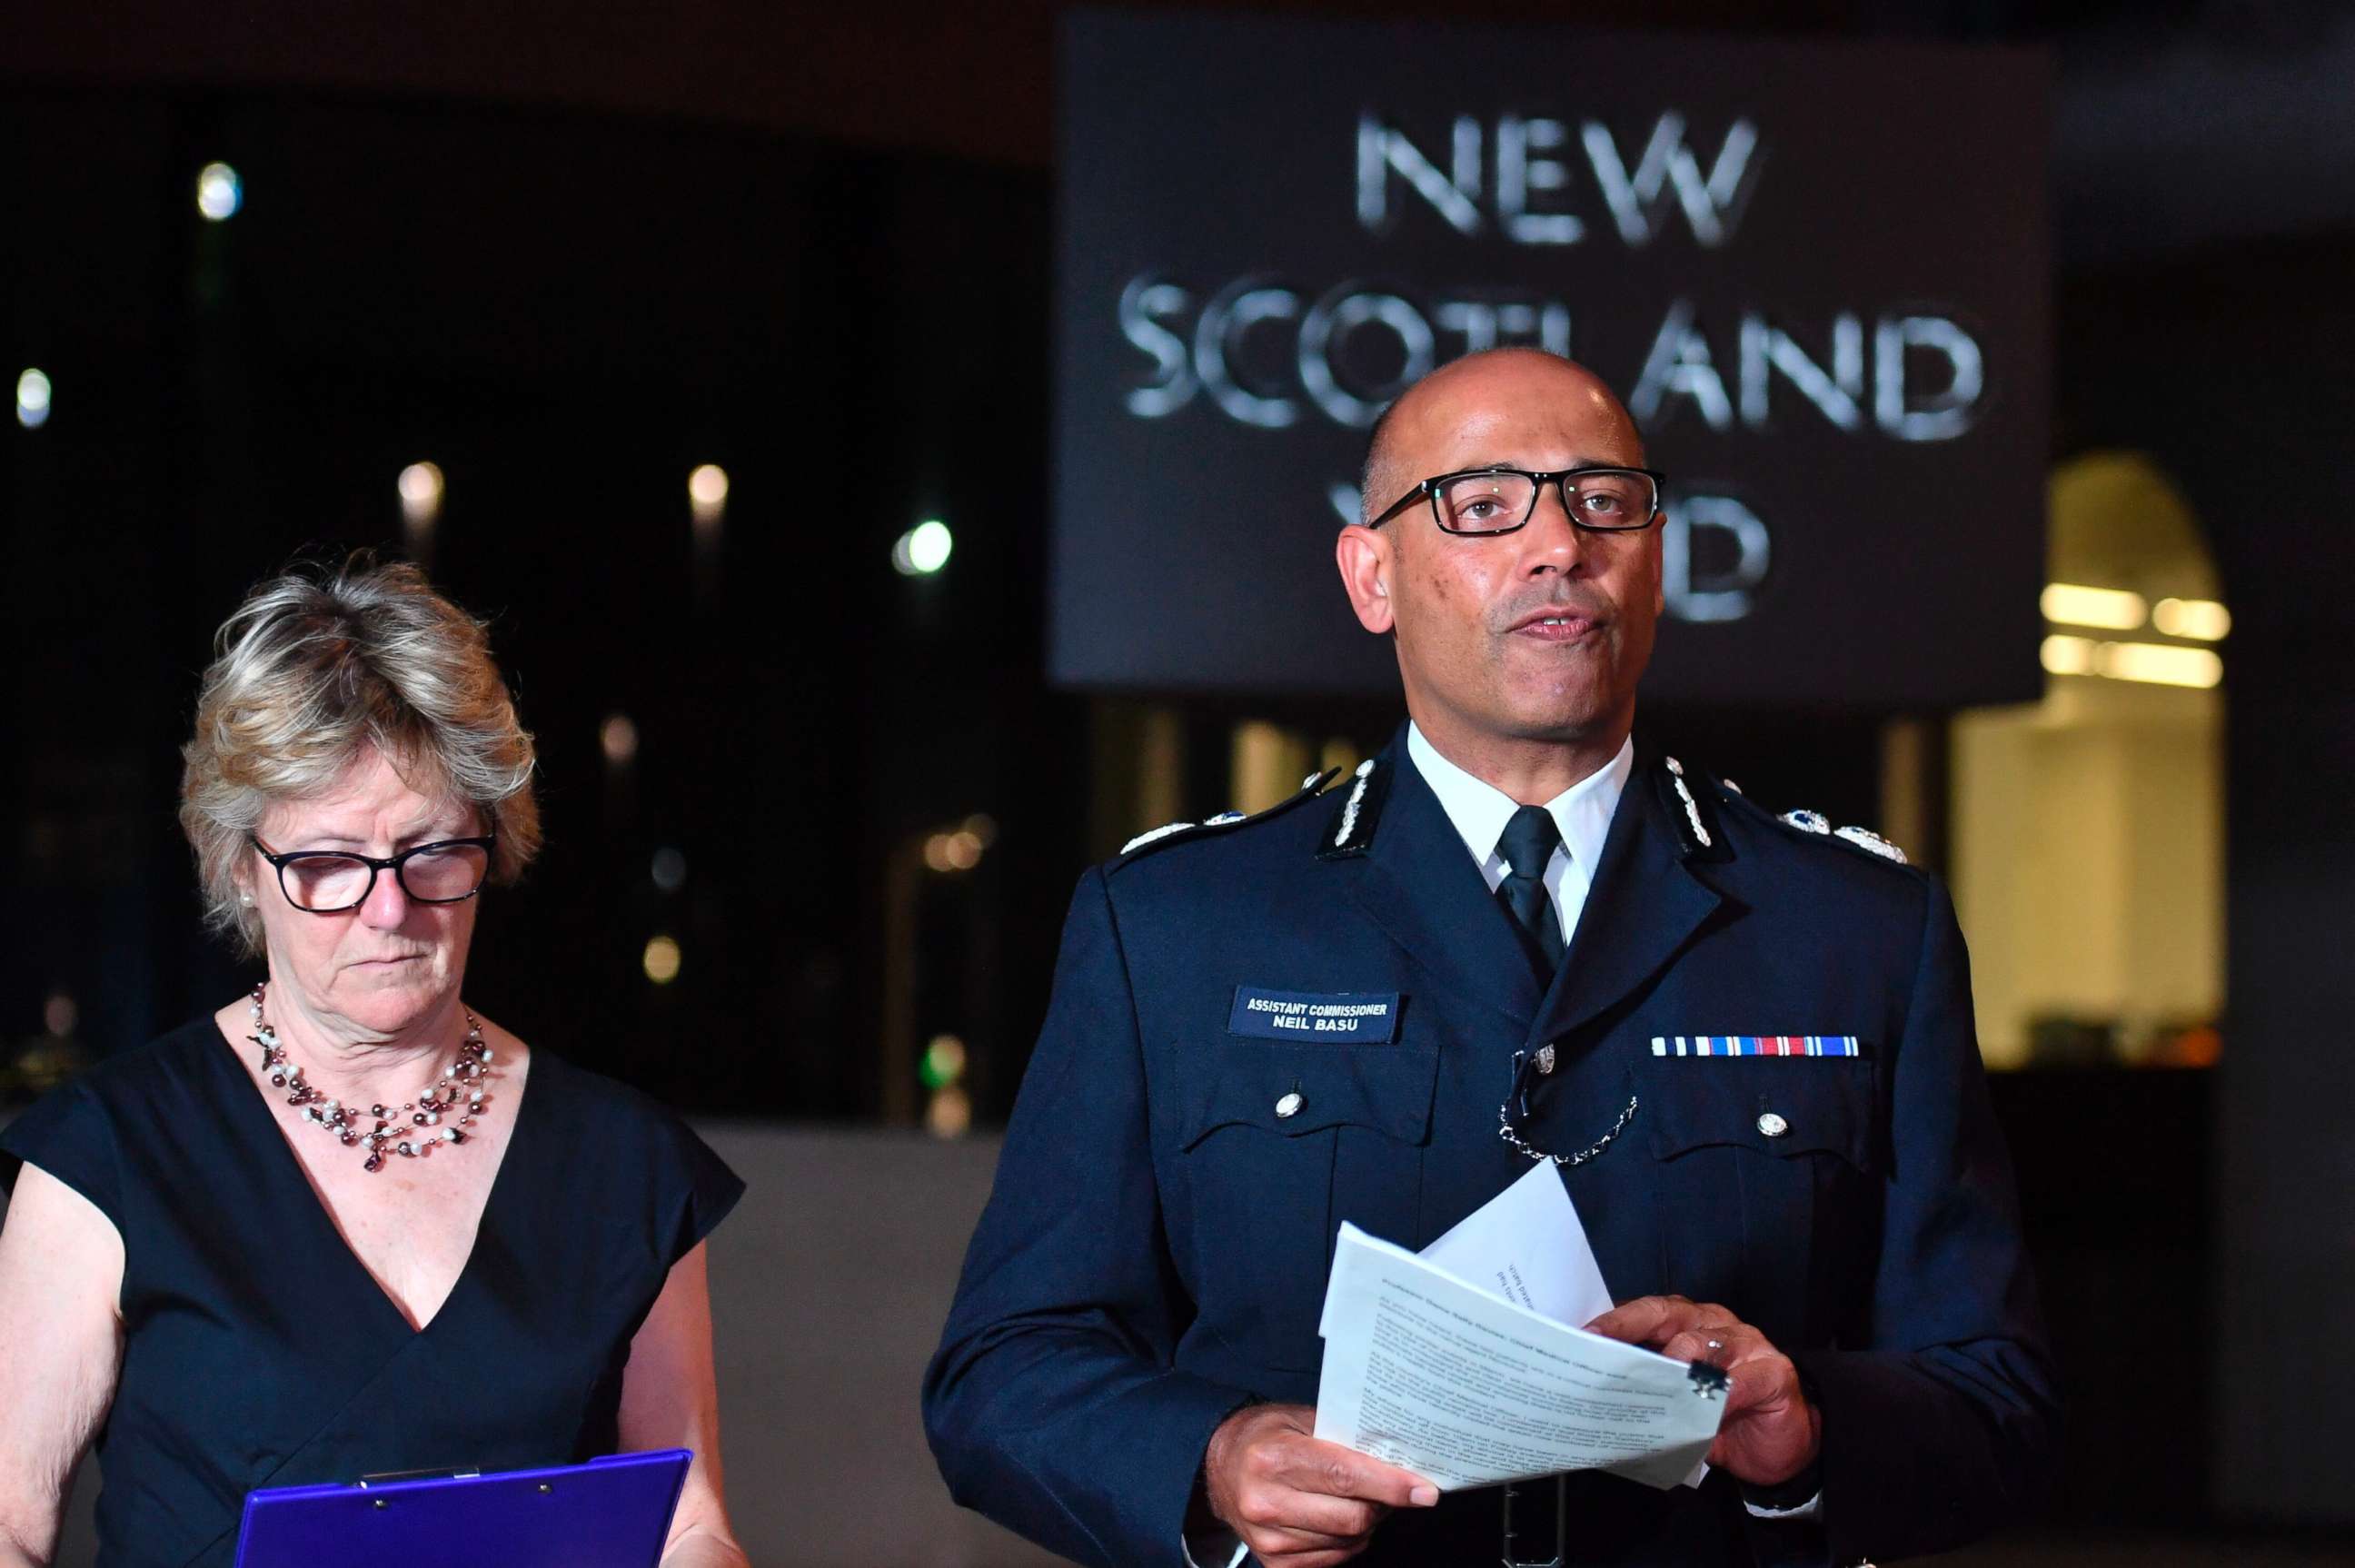 PHOTO: The UK's head of counter-terrorism policing Neil Basu, right, and chief medical officer for England Dame Sally Davies speaking at a news conference at New Scotland Yard in London, July 4, 2018.